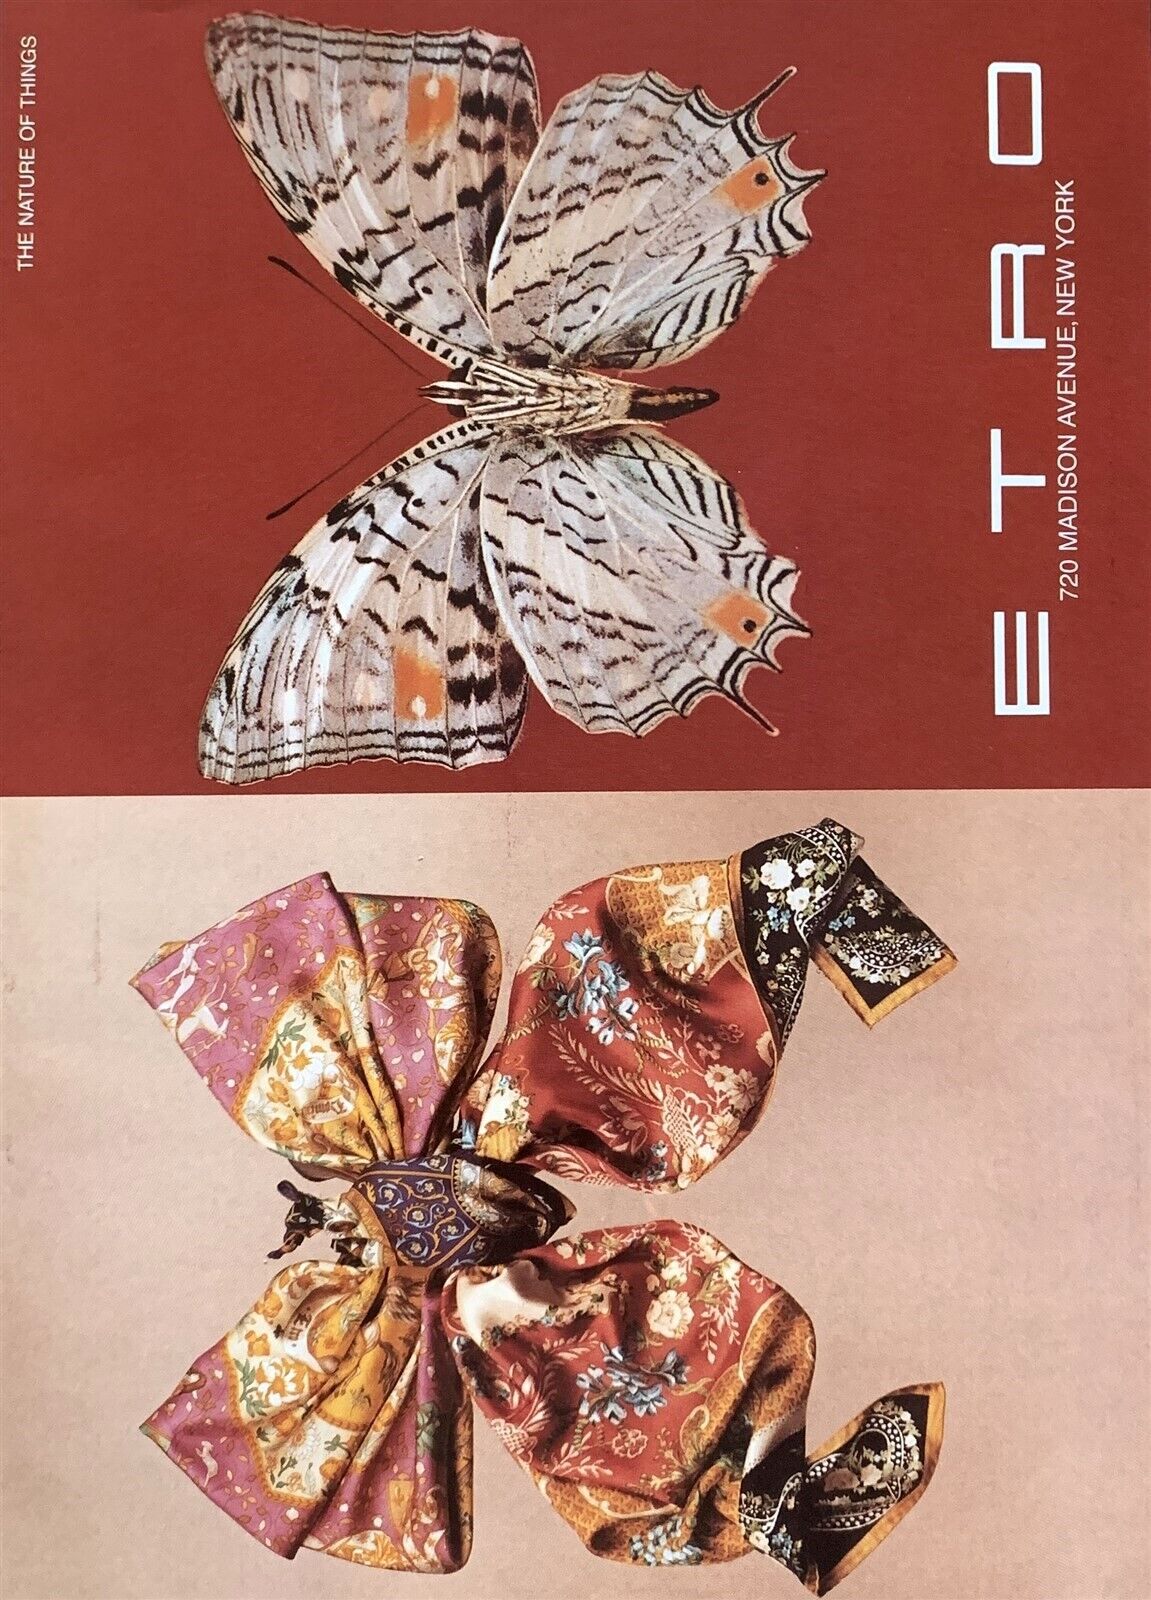 1996 ETRO Scarf Collection The Nature of Things Original Magazine PRINT AD